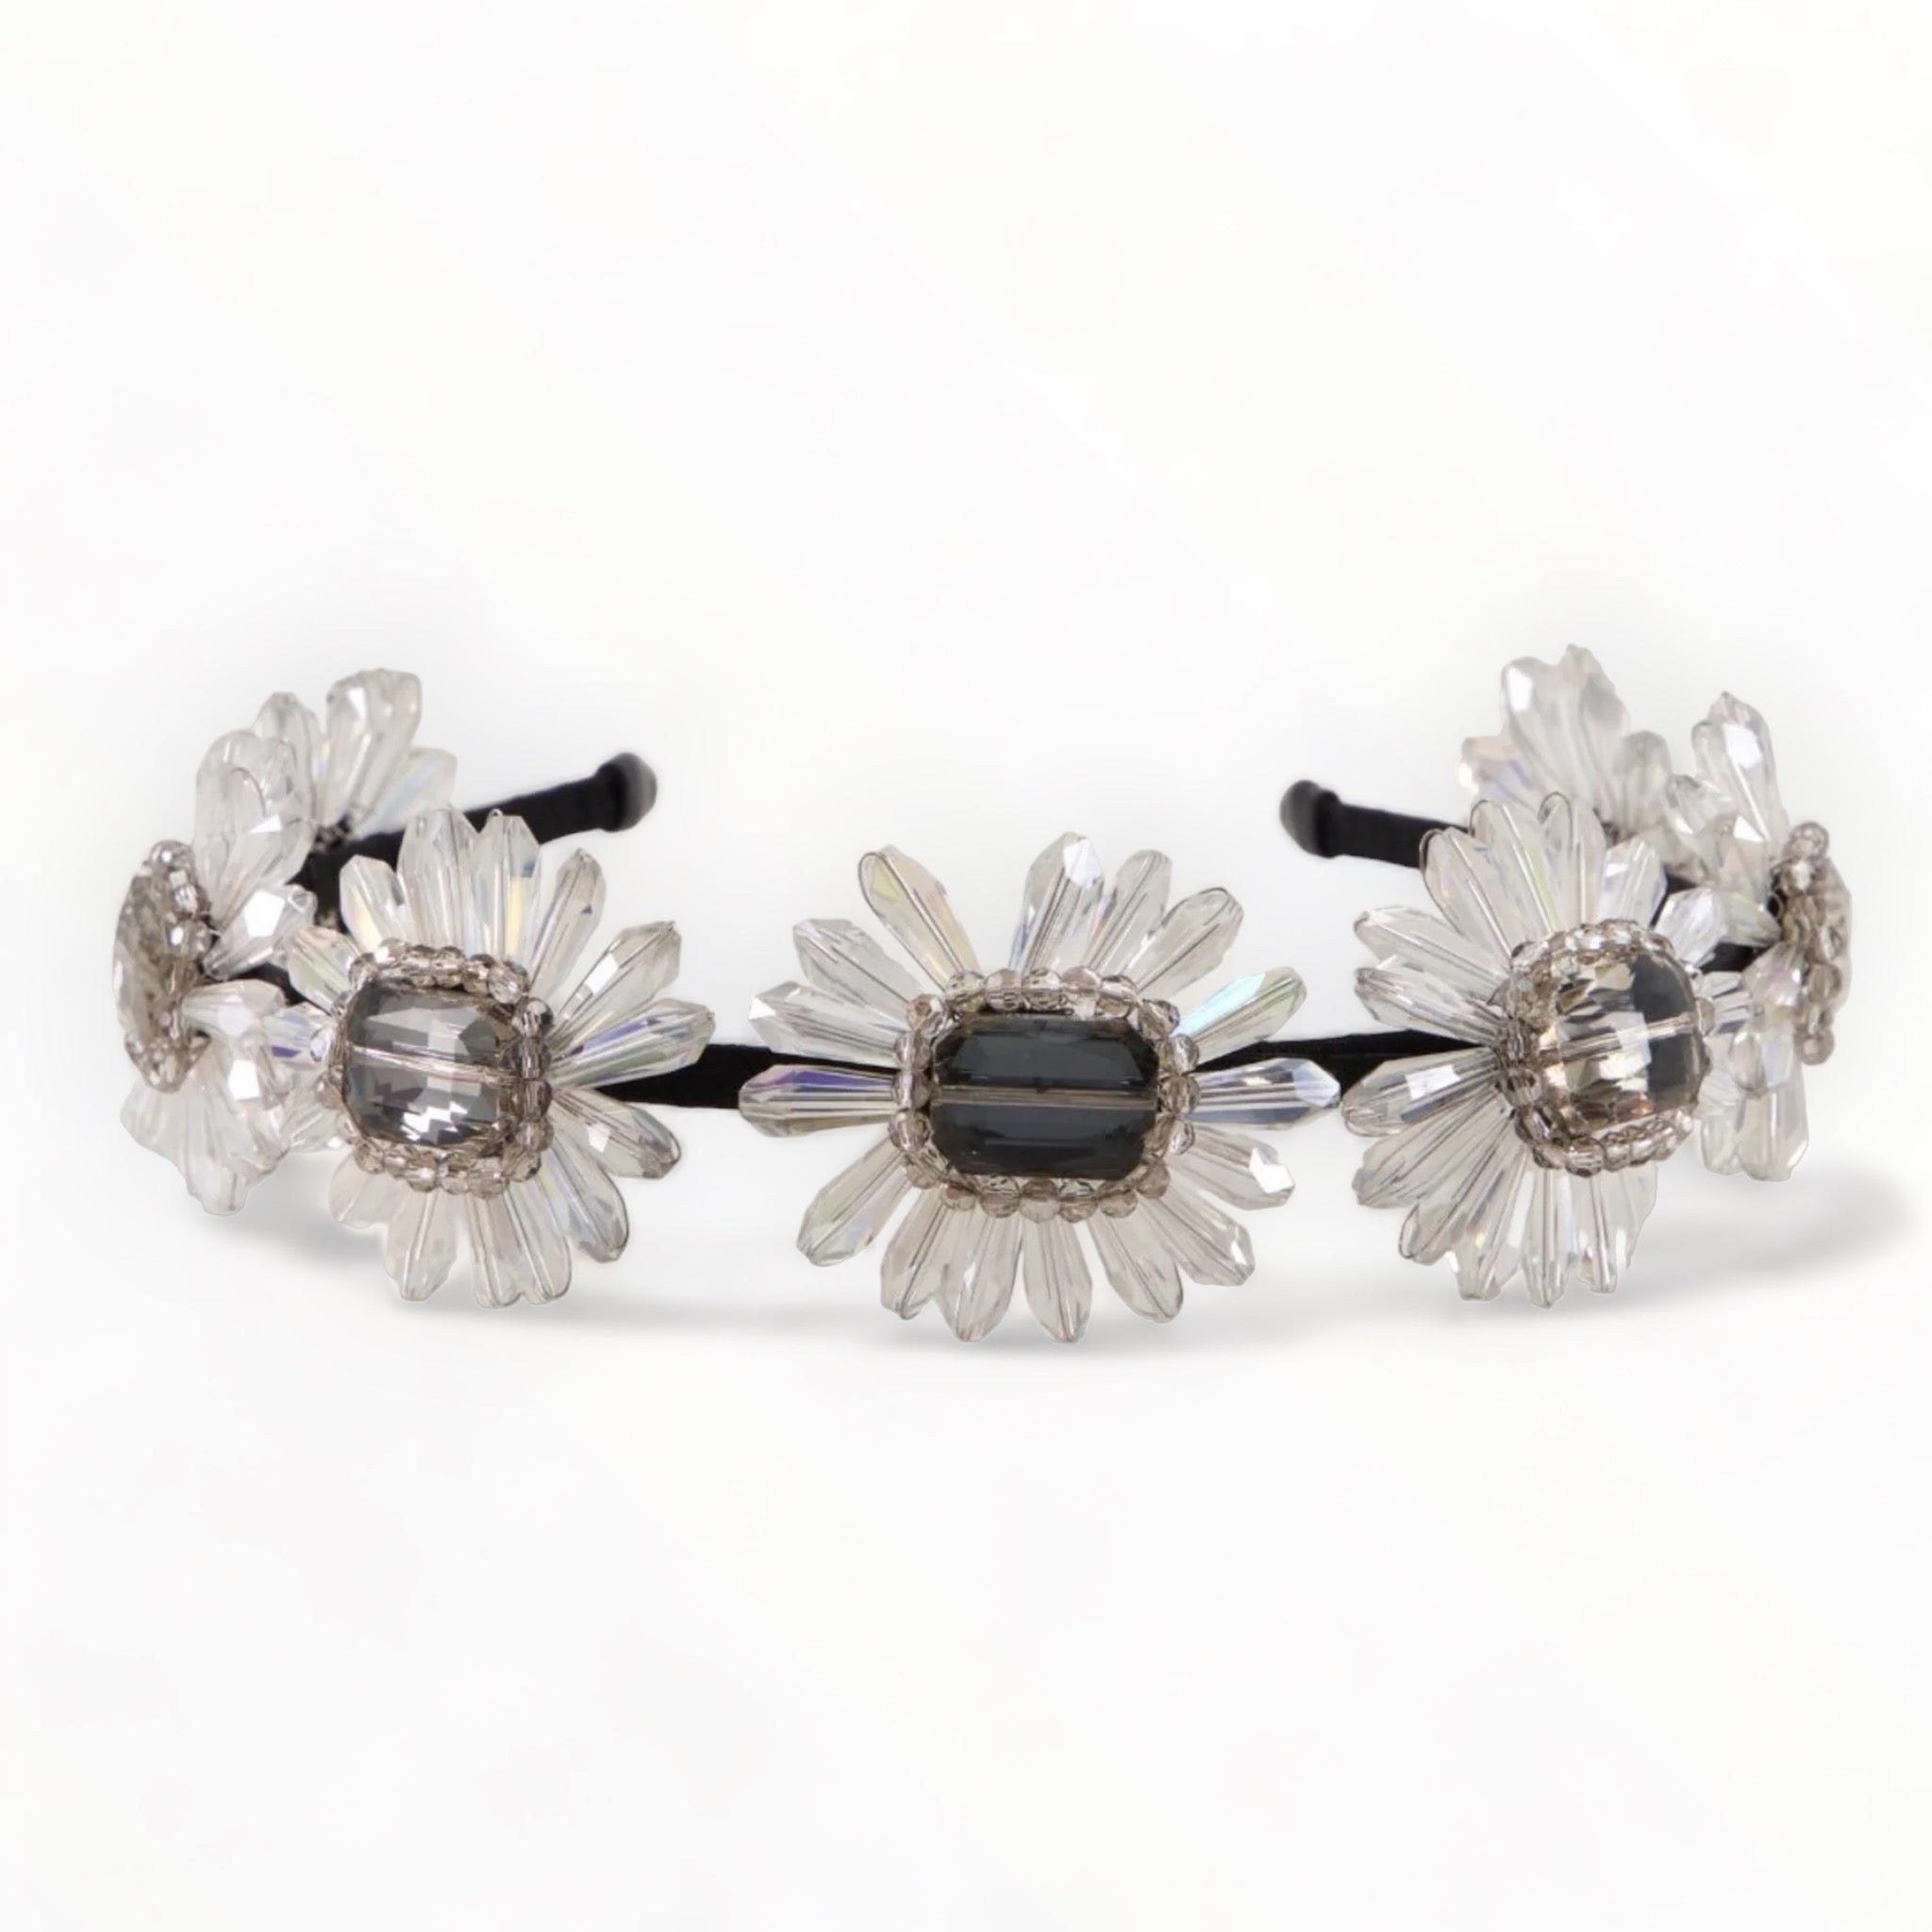 Designer Girls Crystal Hair Accessories - Sienna Likes to Party